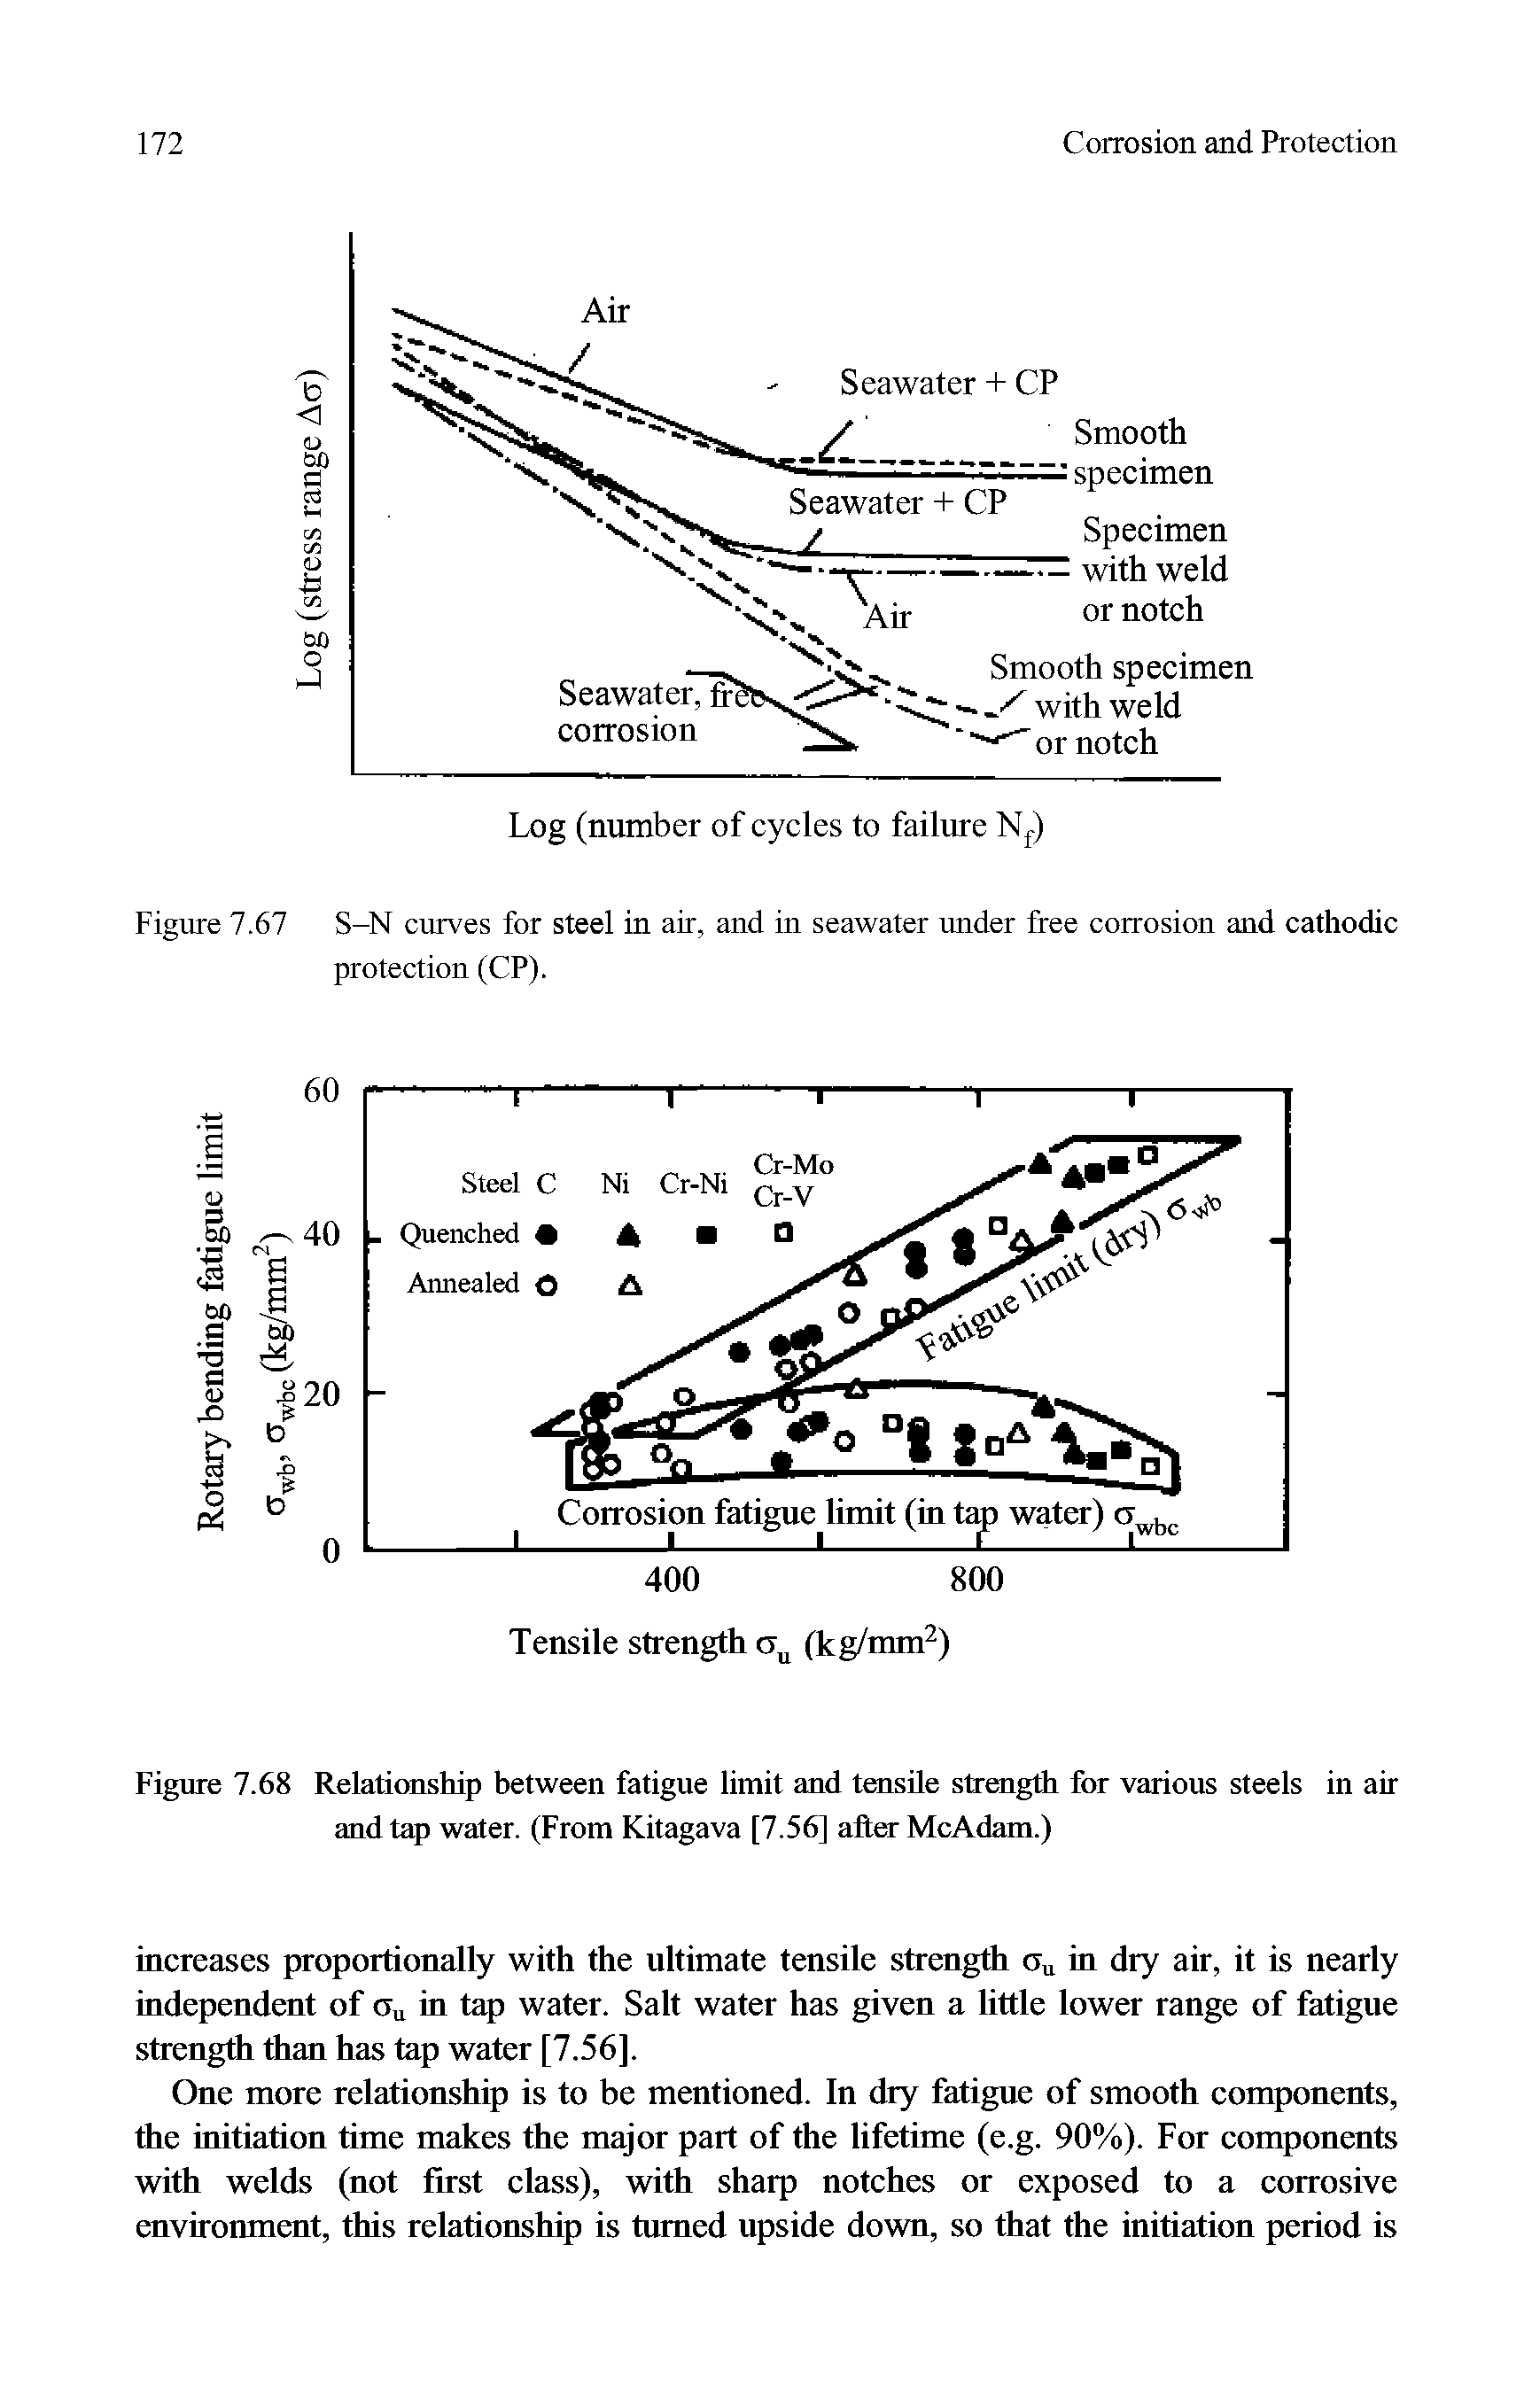 Figure 7.67 S-N curves for steel in air, and in seawater under free corrosion and cathodic protection (CP).